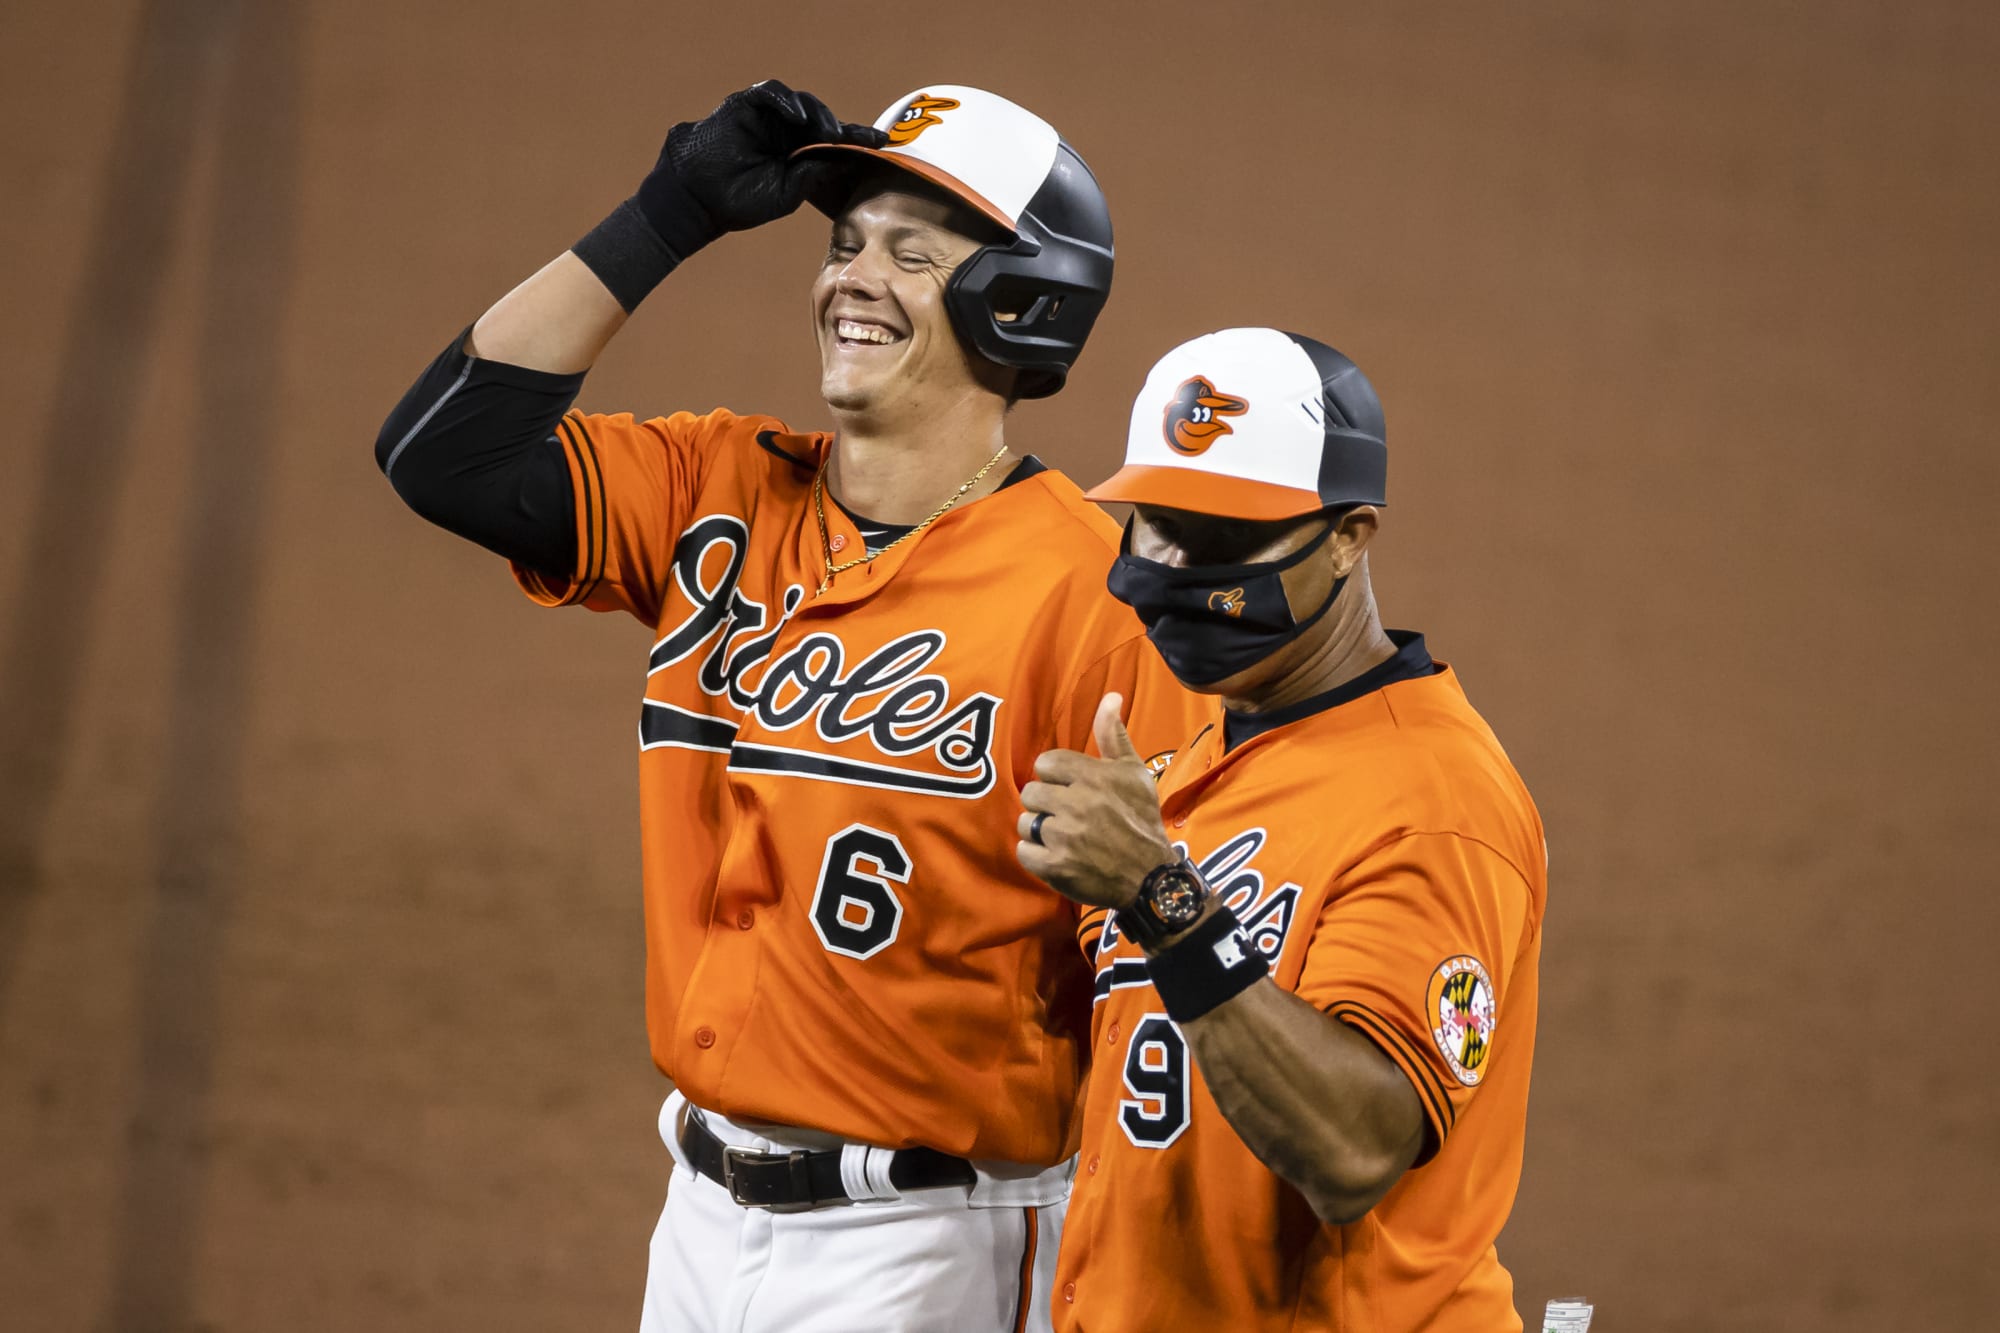 Baltimore Orioles The future is arriving and it looks pretty bright